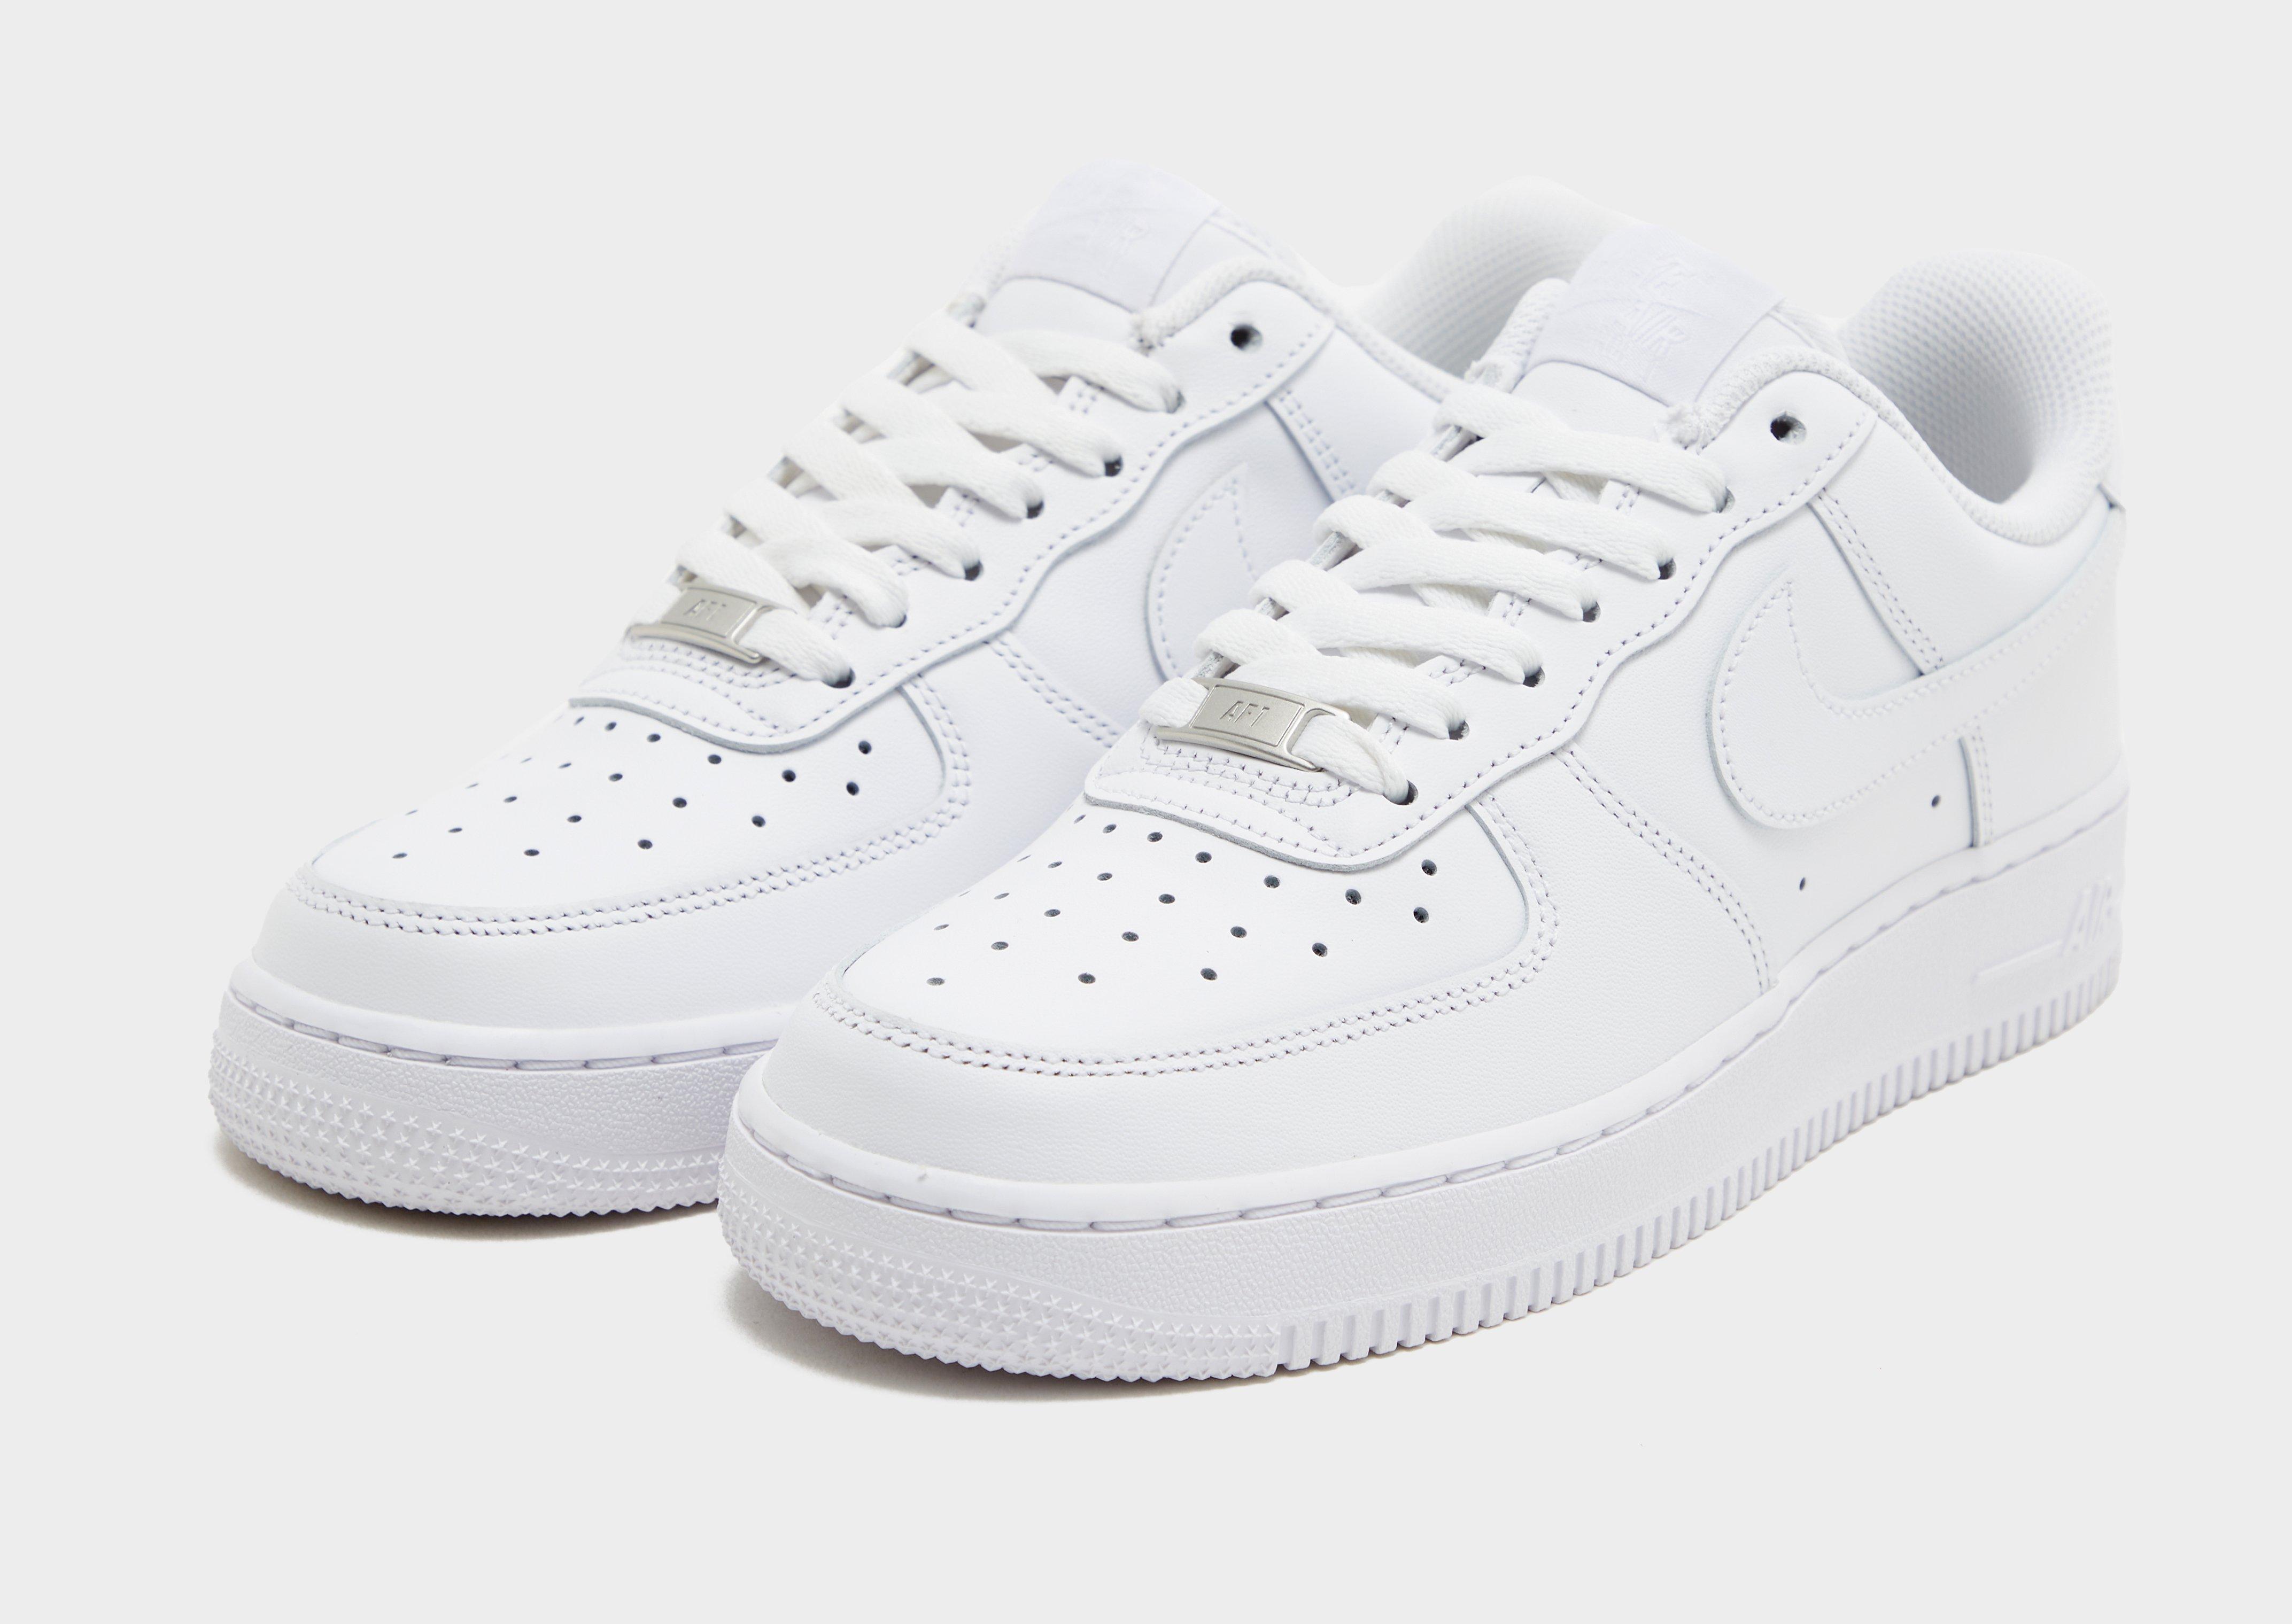 nike air force one jd sports cheap online